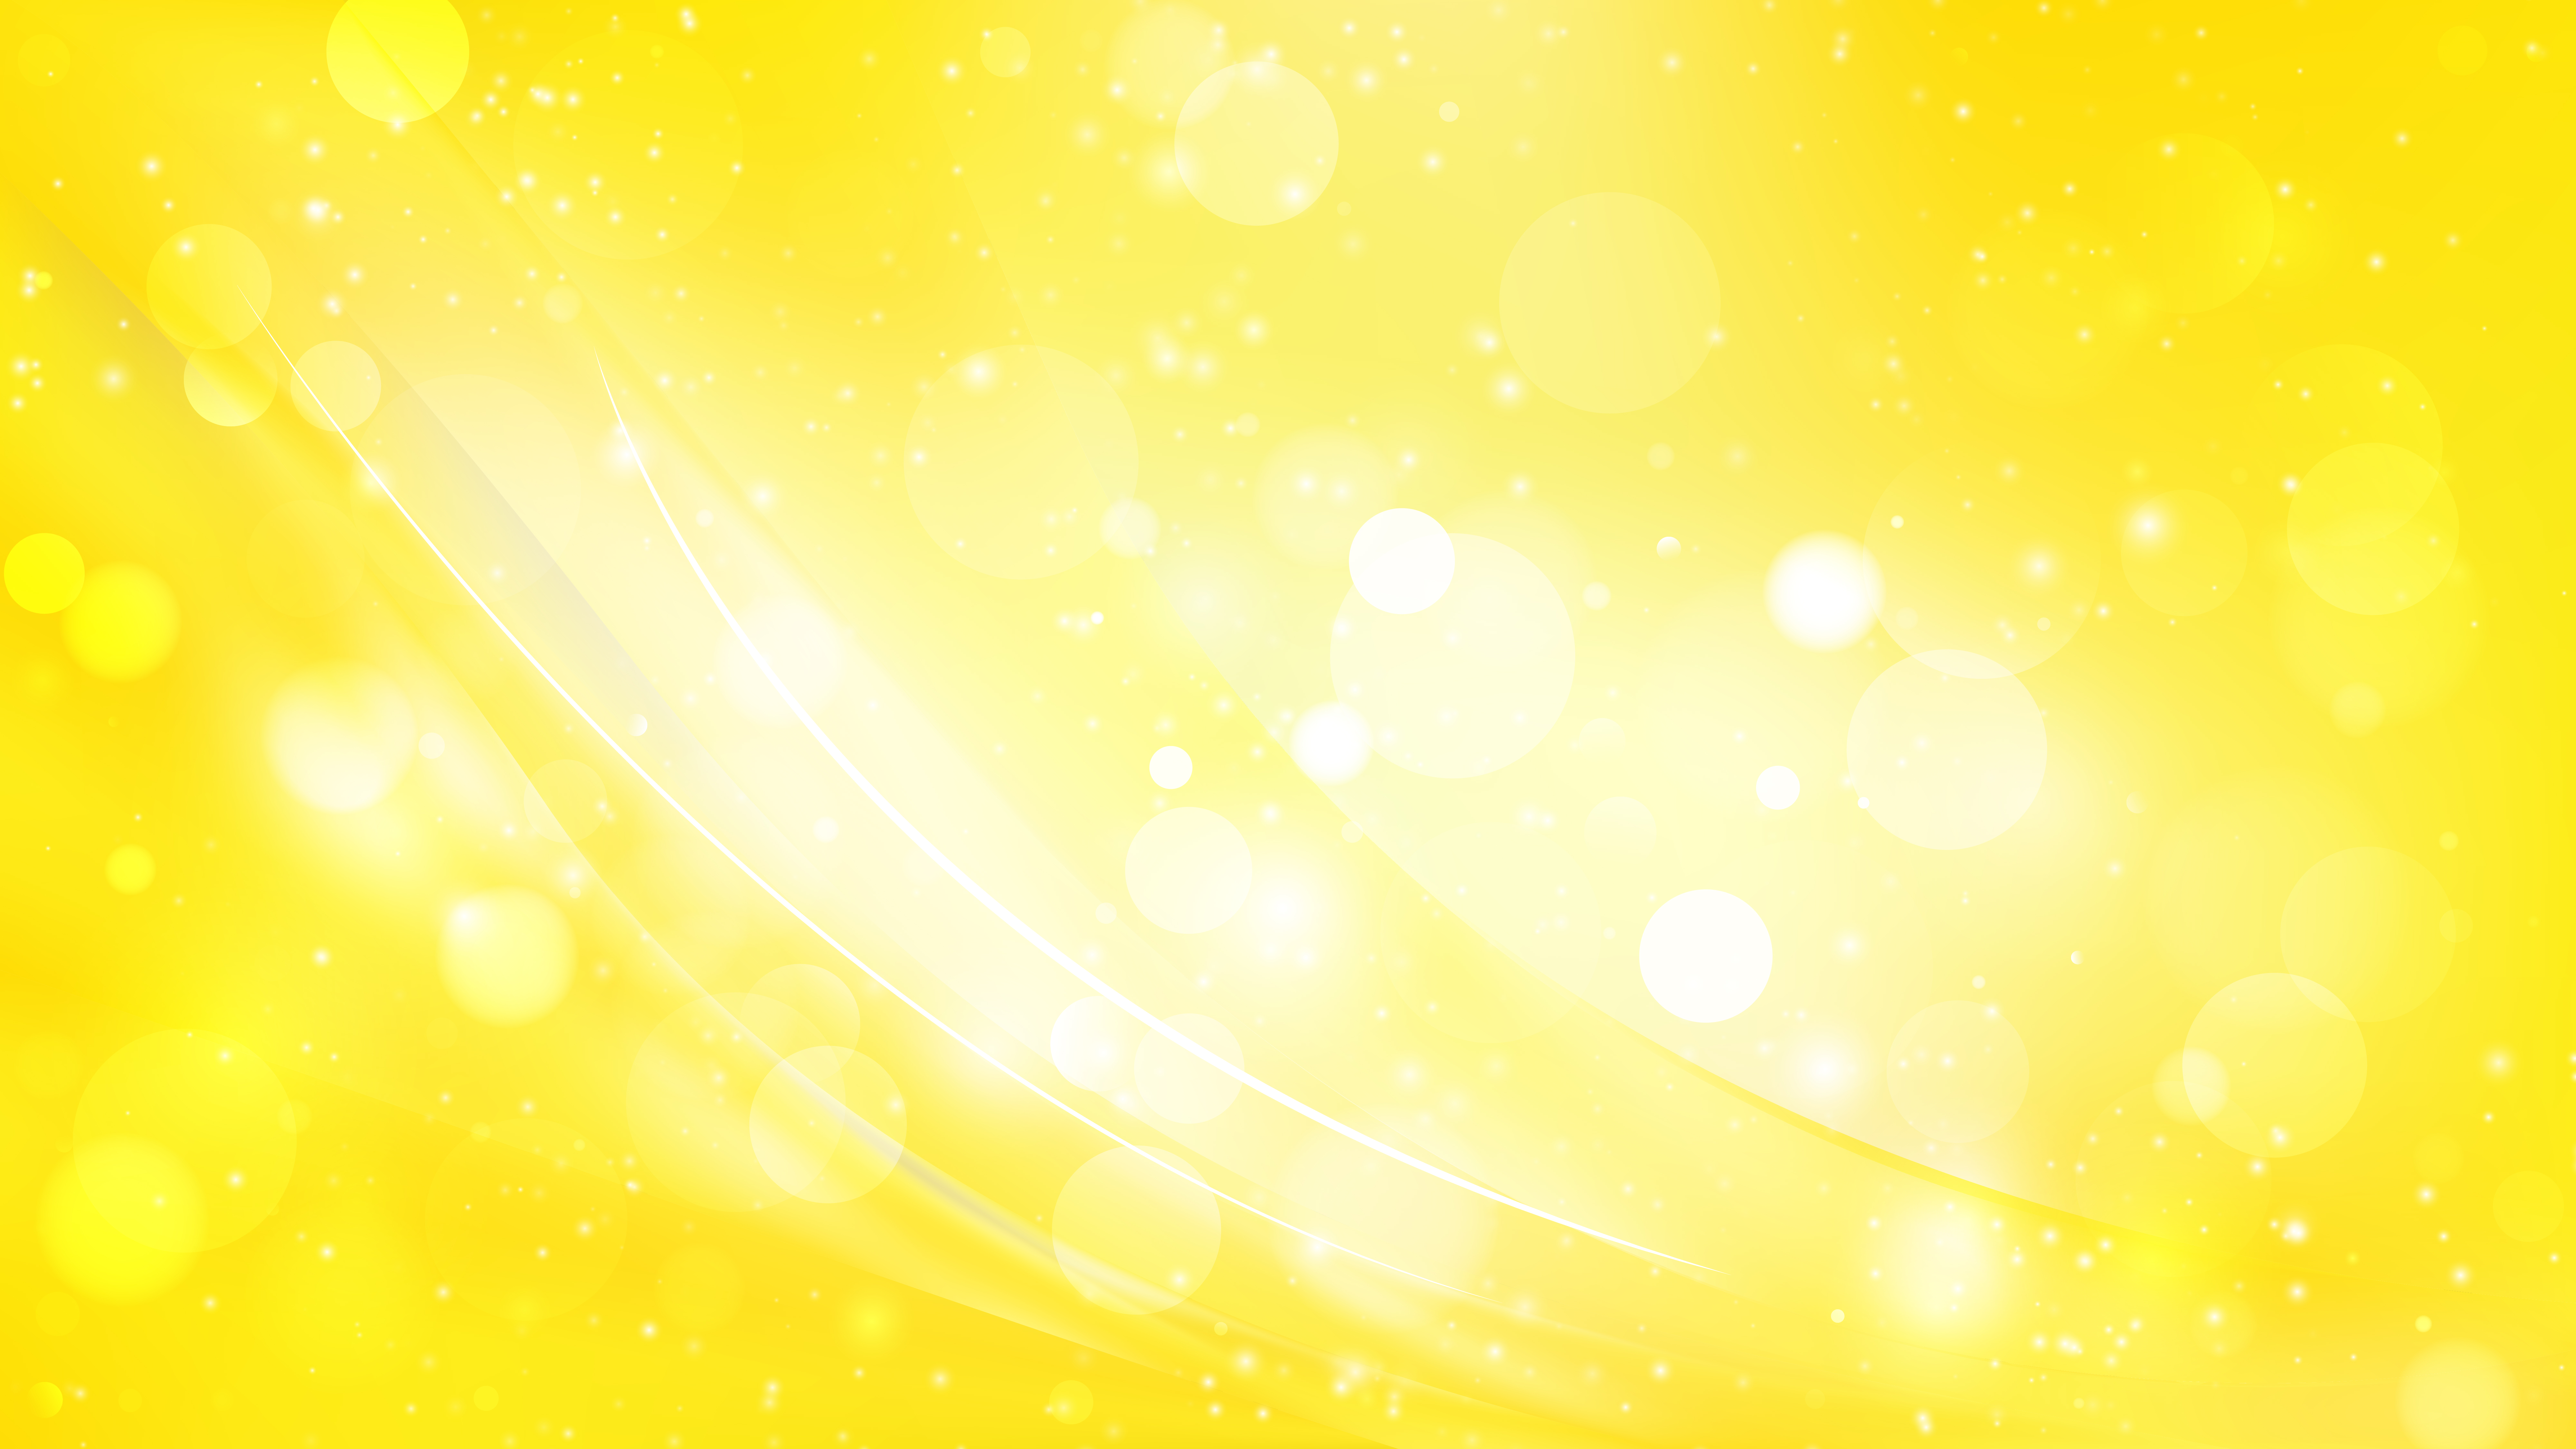 Fange Egypten tykkelse Free Abstract Bright Yellow Blurry Lights Background Vector